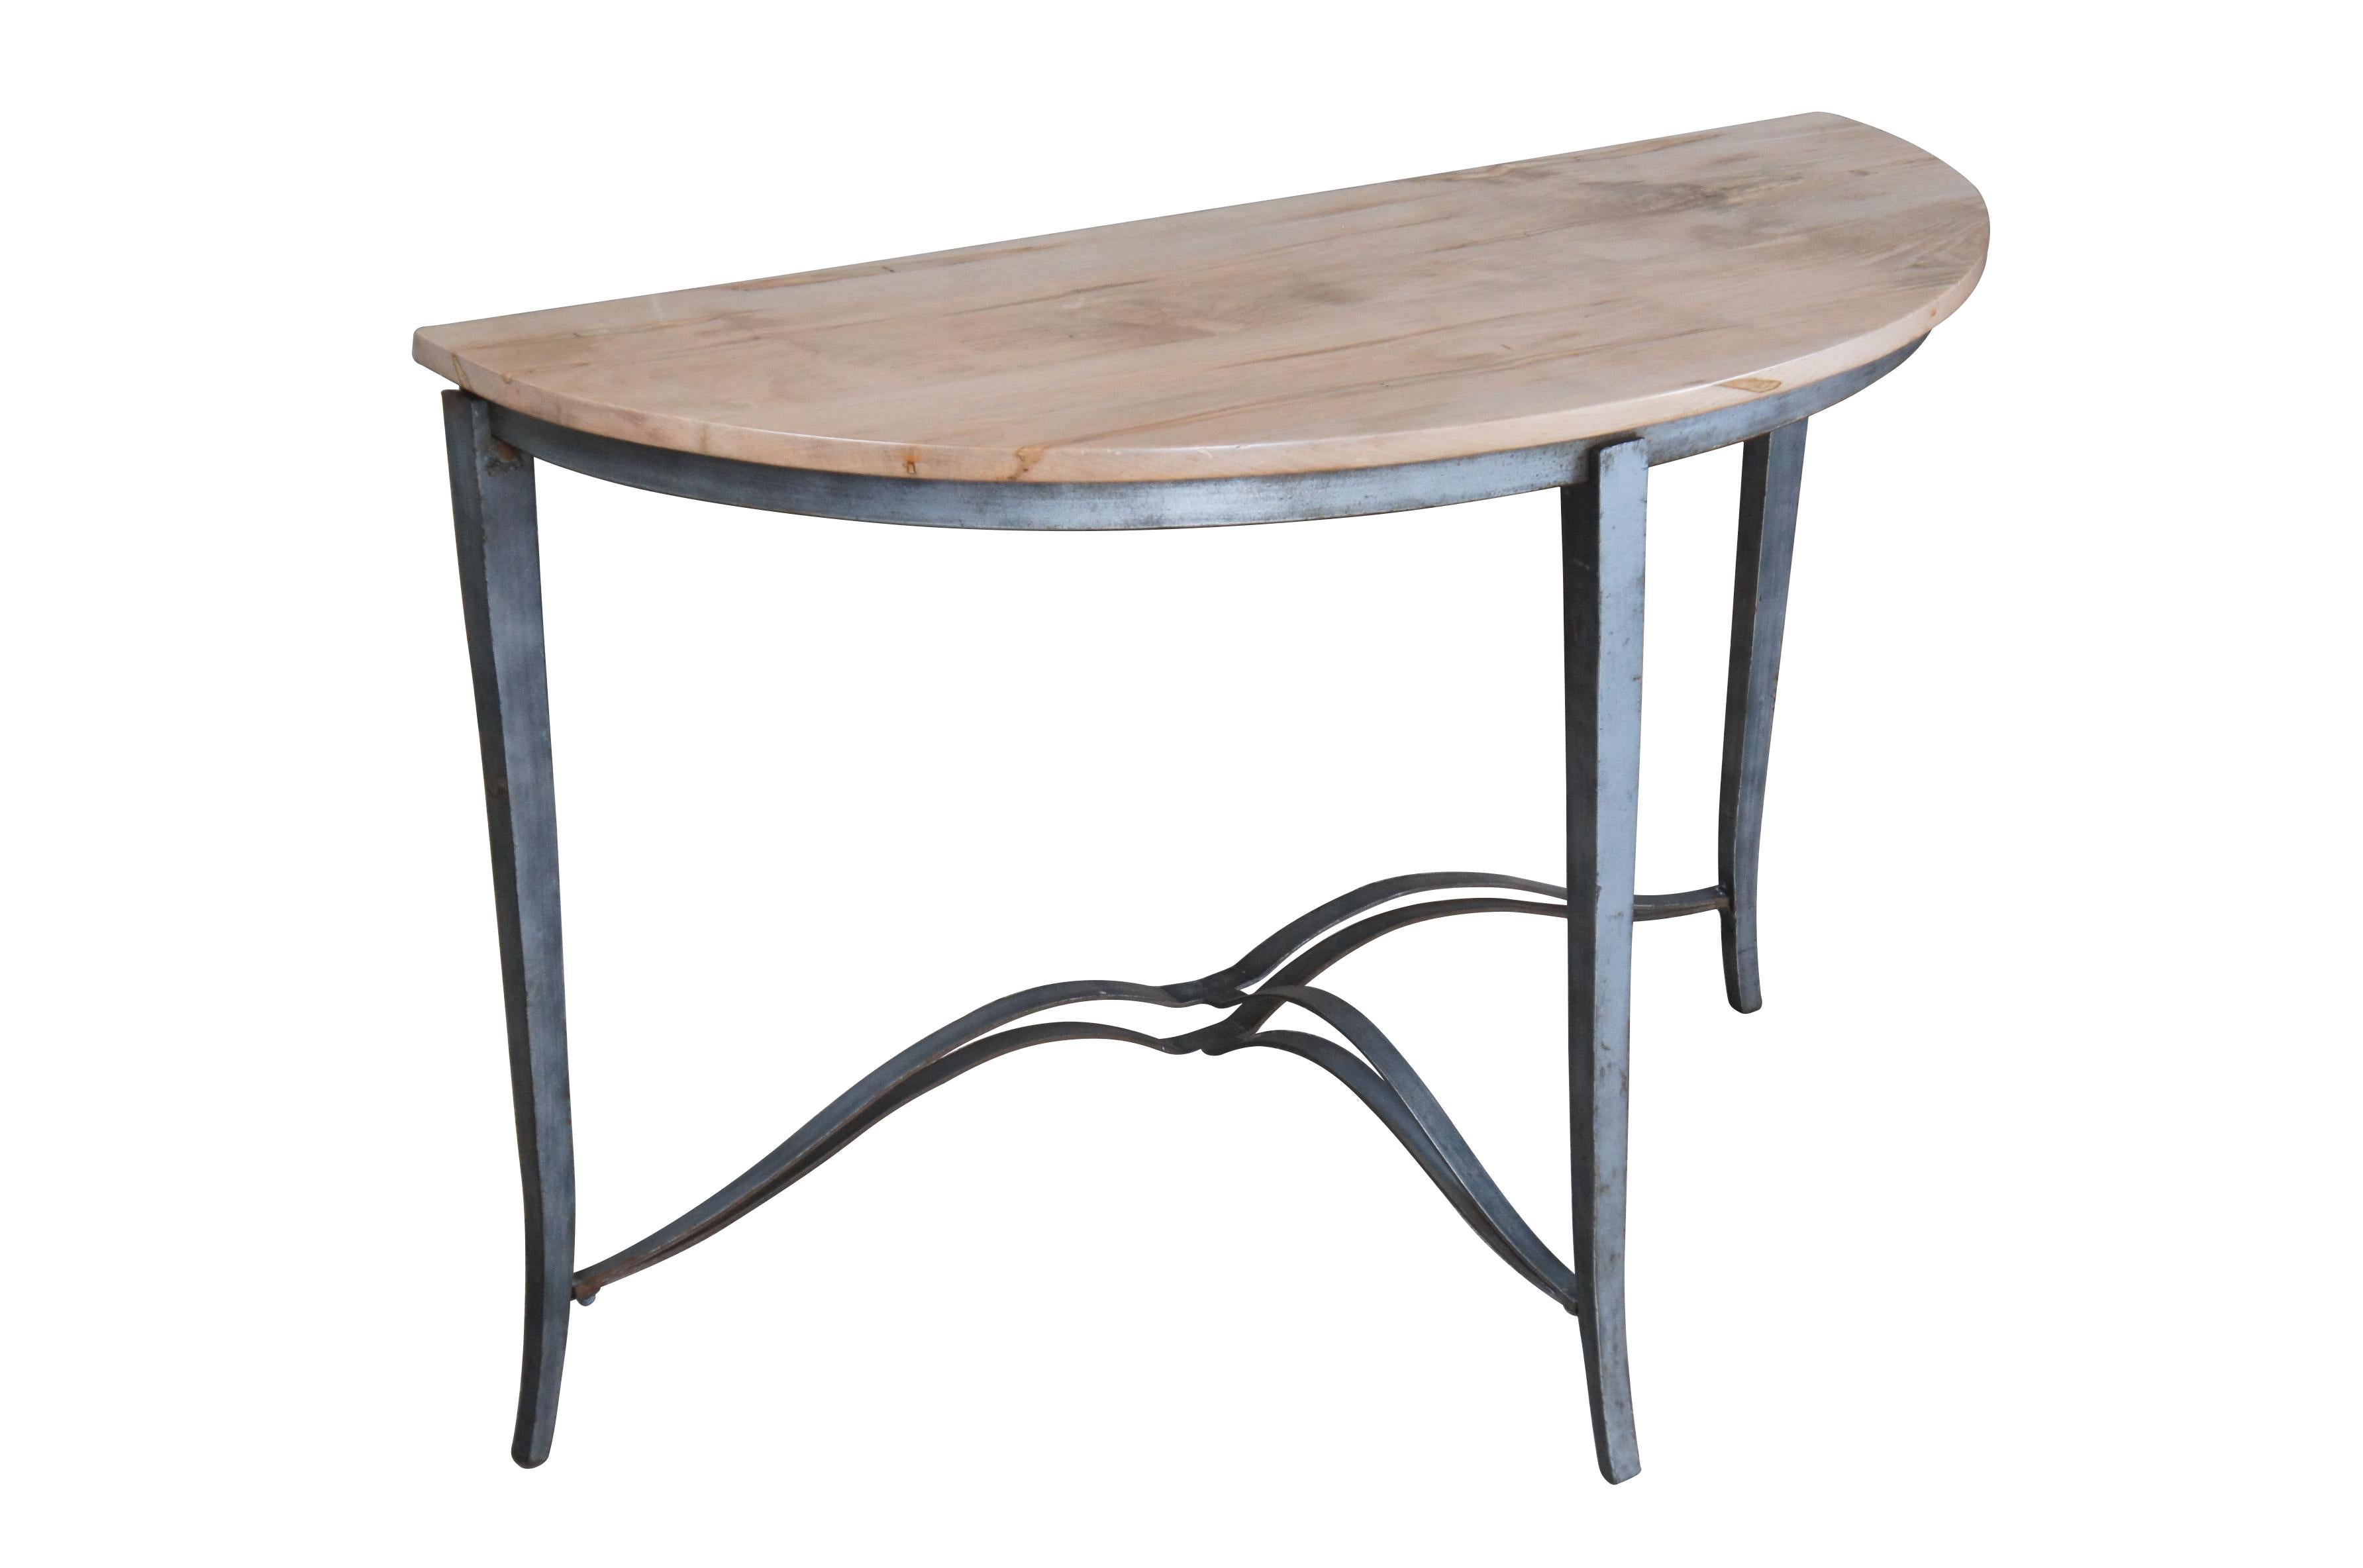 Half Moon maple console table with industrial reclaimed iron base, circa second half 20th century.  Features tapered legs connected by a serpentine support.  Great for in an entry hall or living space.

Dimensions:
19.5